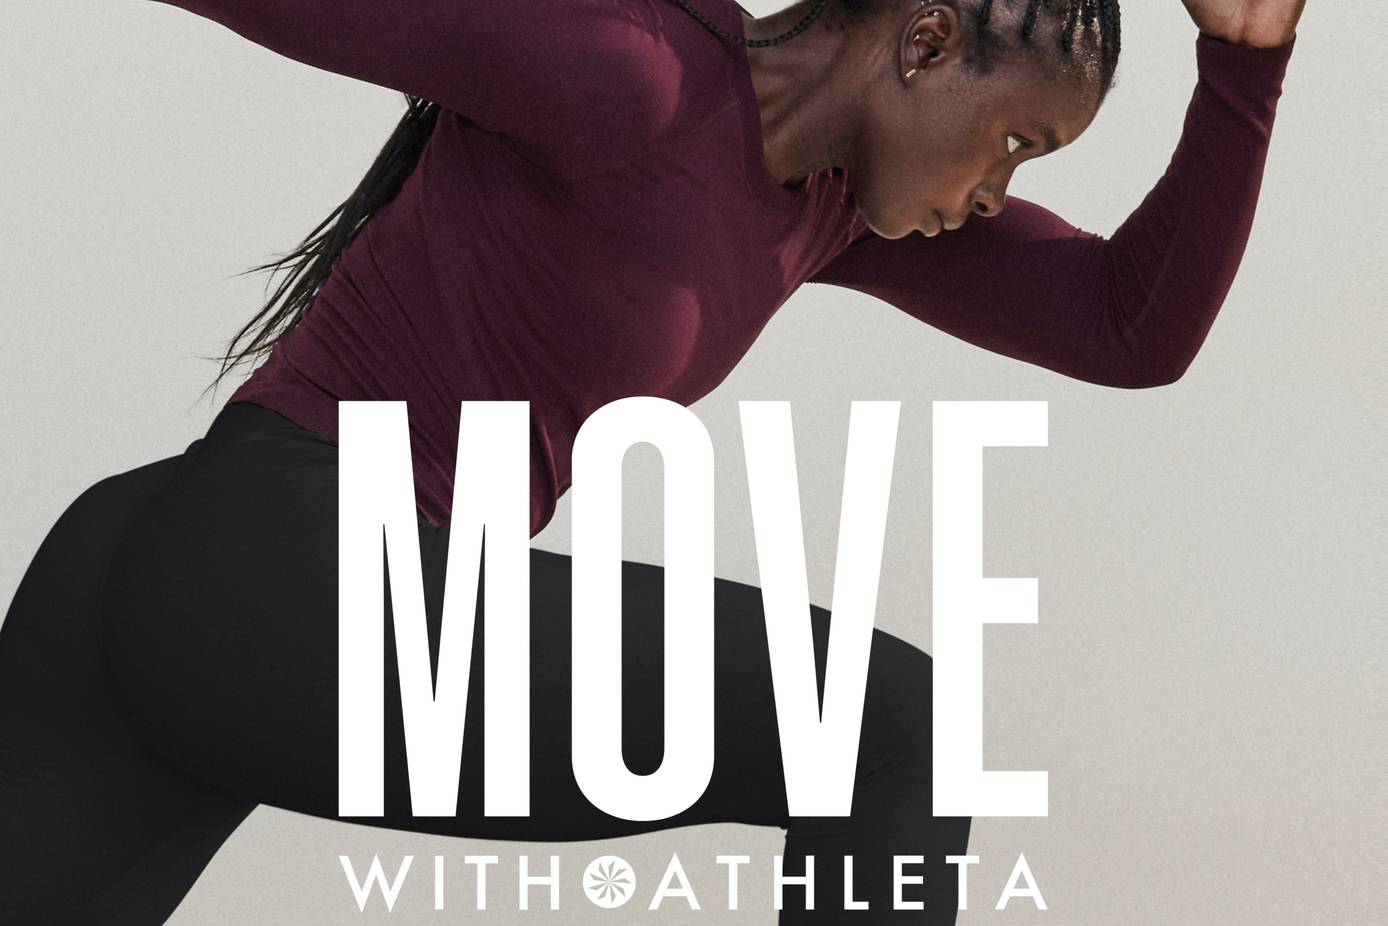 Big news! Athleta is now in the Exchange. A brand designed with women, for  women. At Athleta, our mission is to ignite the limitless…